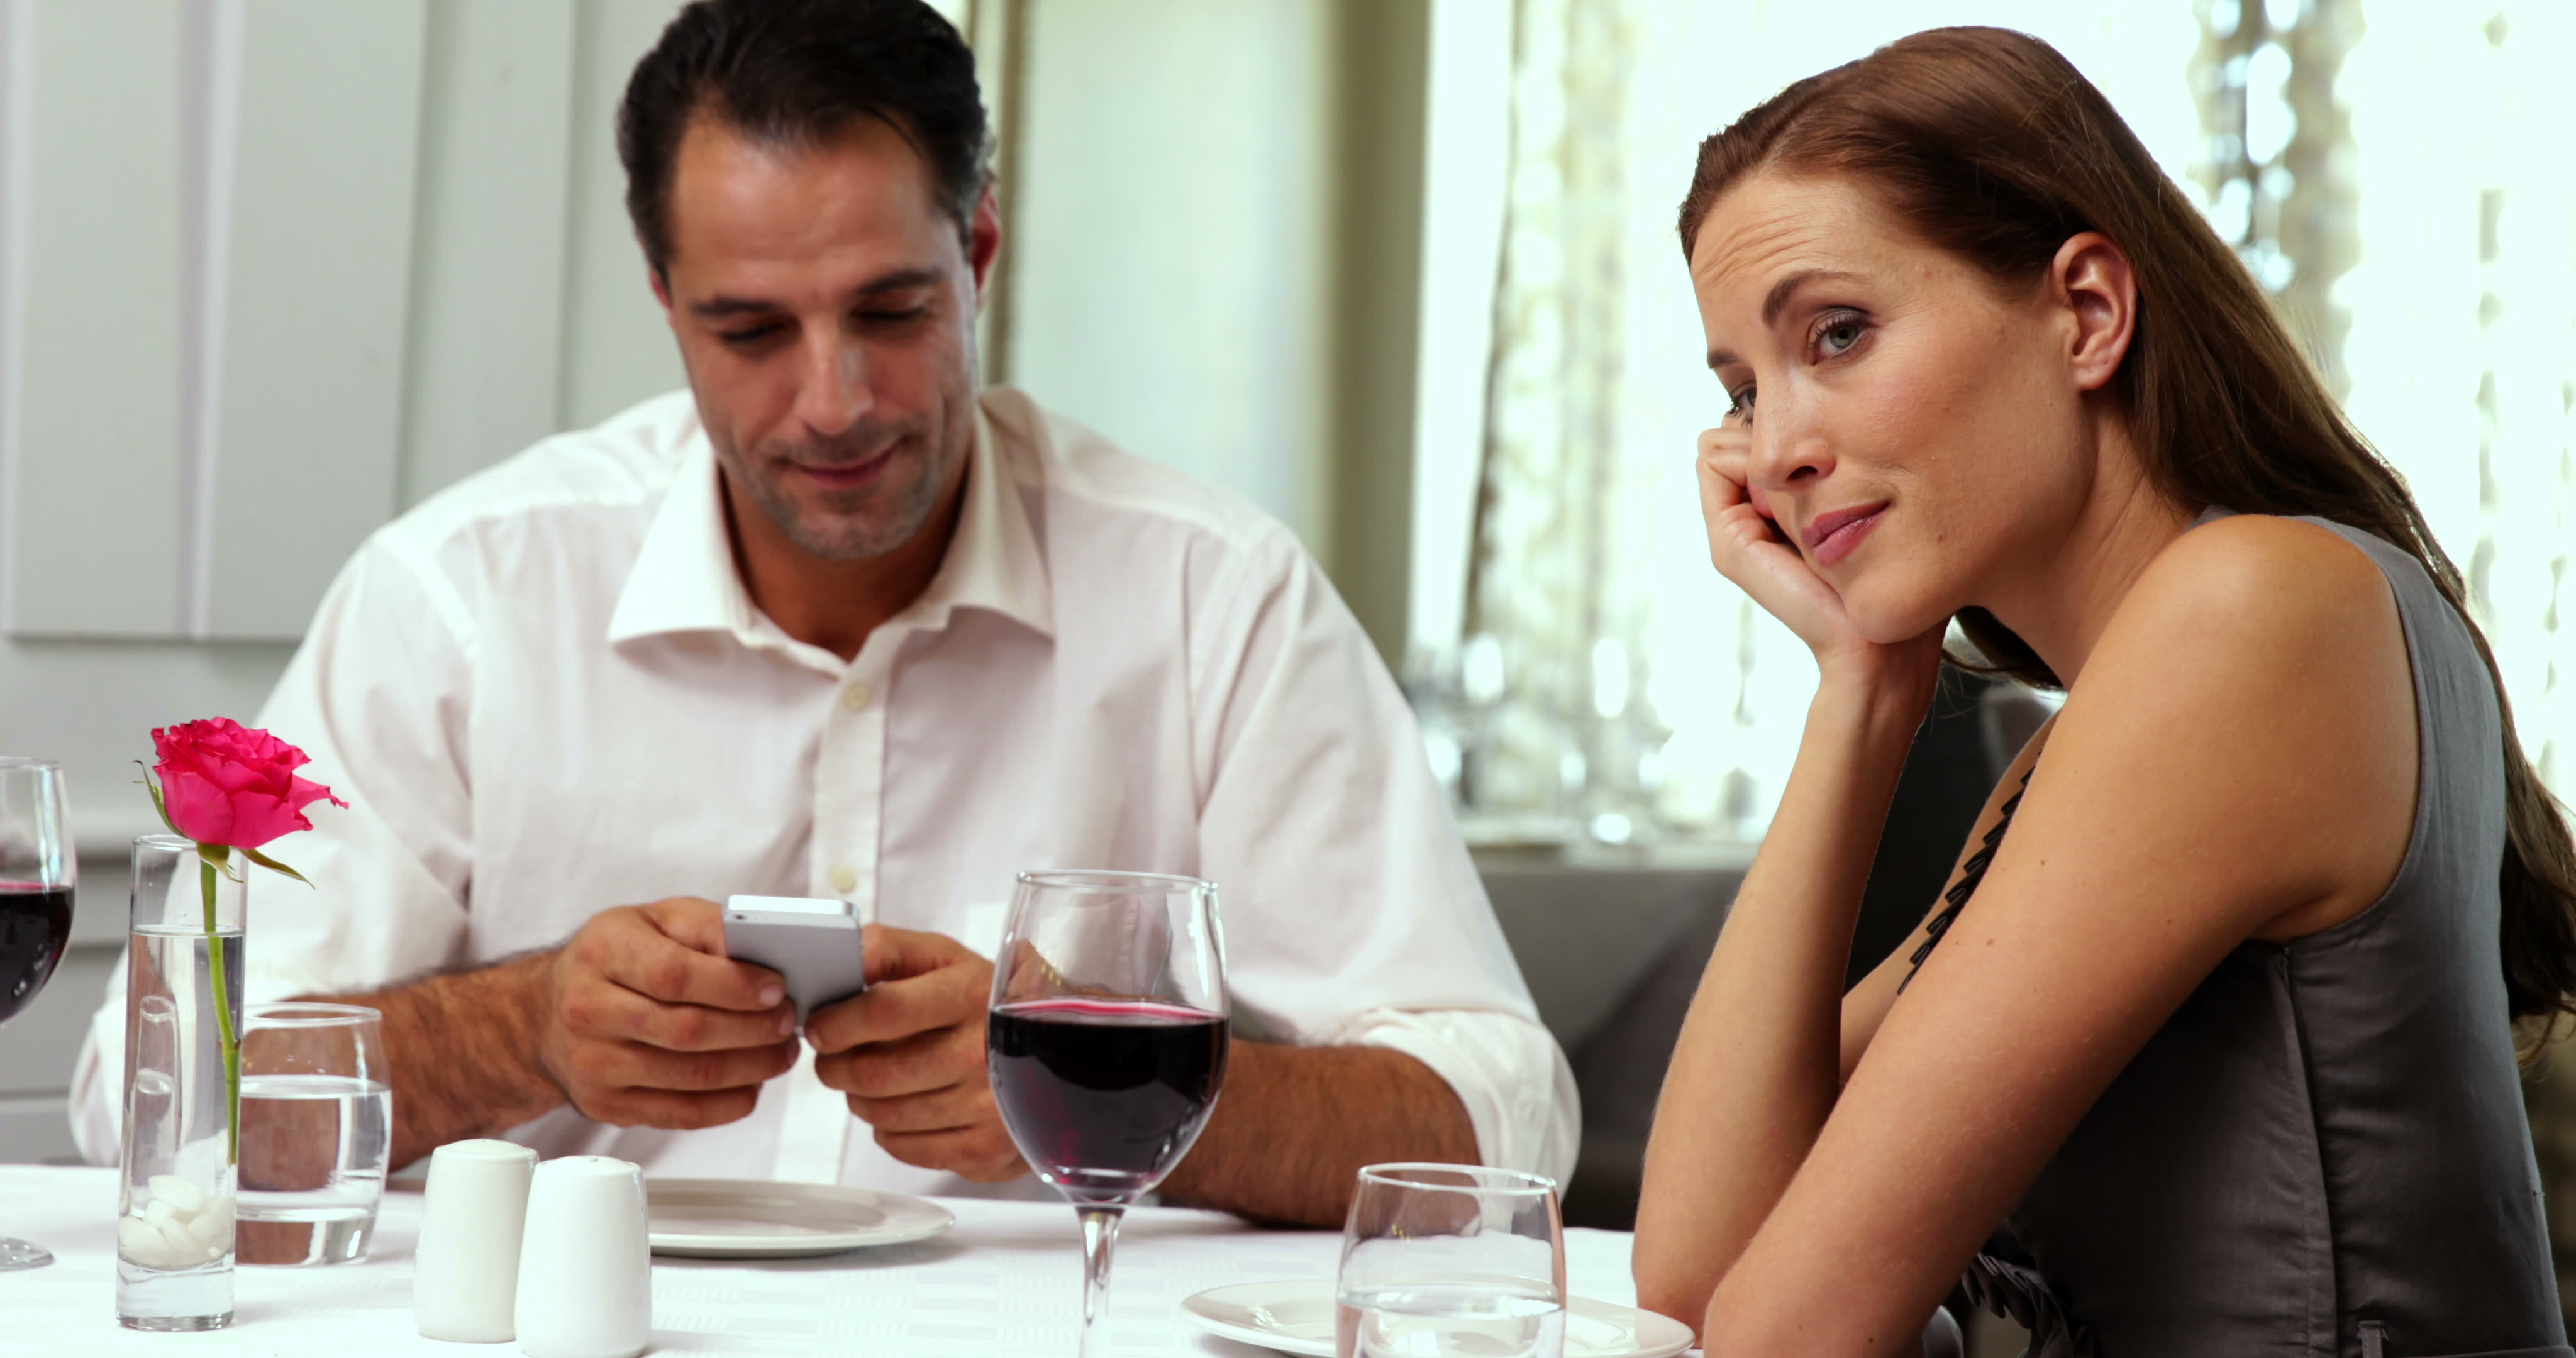 📱 Reply to These Texts and We’ll Reveal How Easily Annoyed You Are stock footage bored woman waiting for her date to stop texting at a restaurant